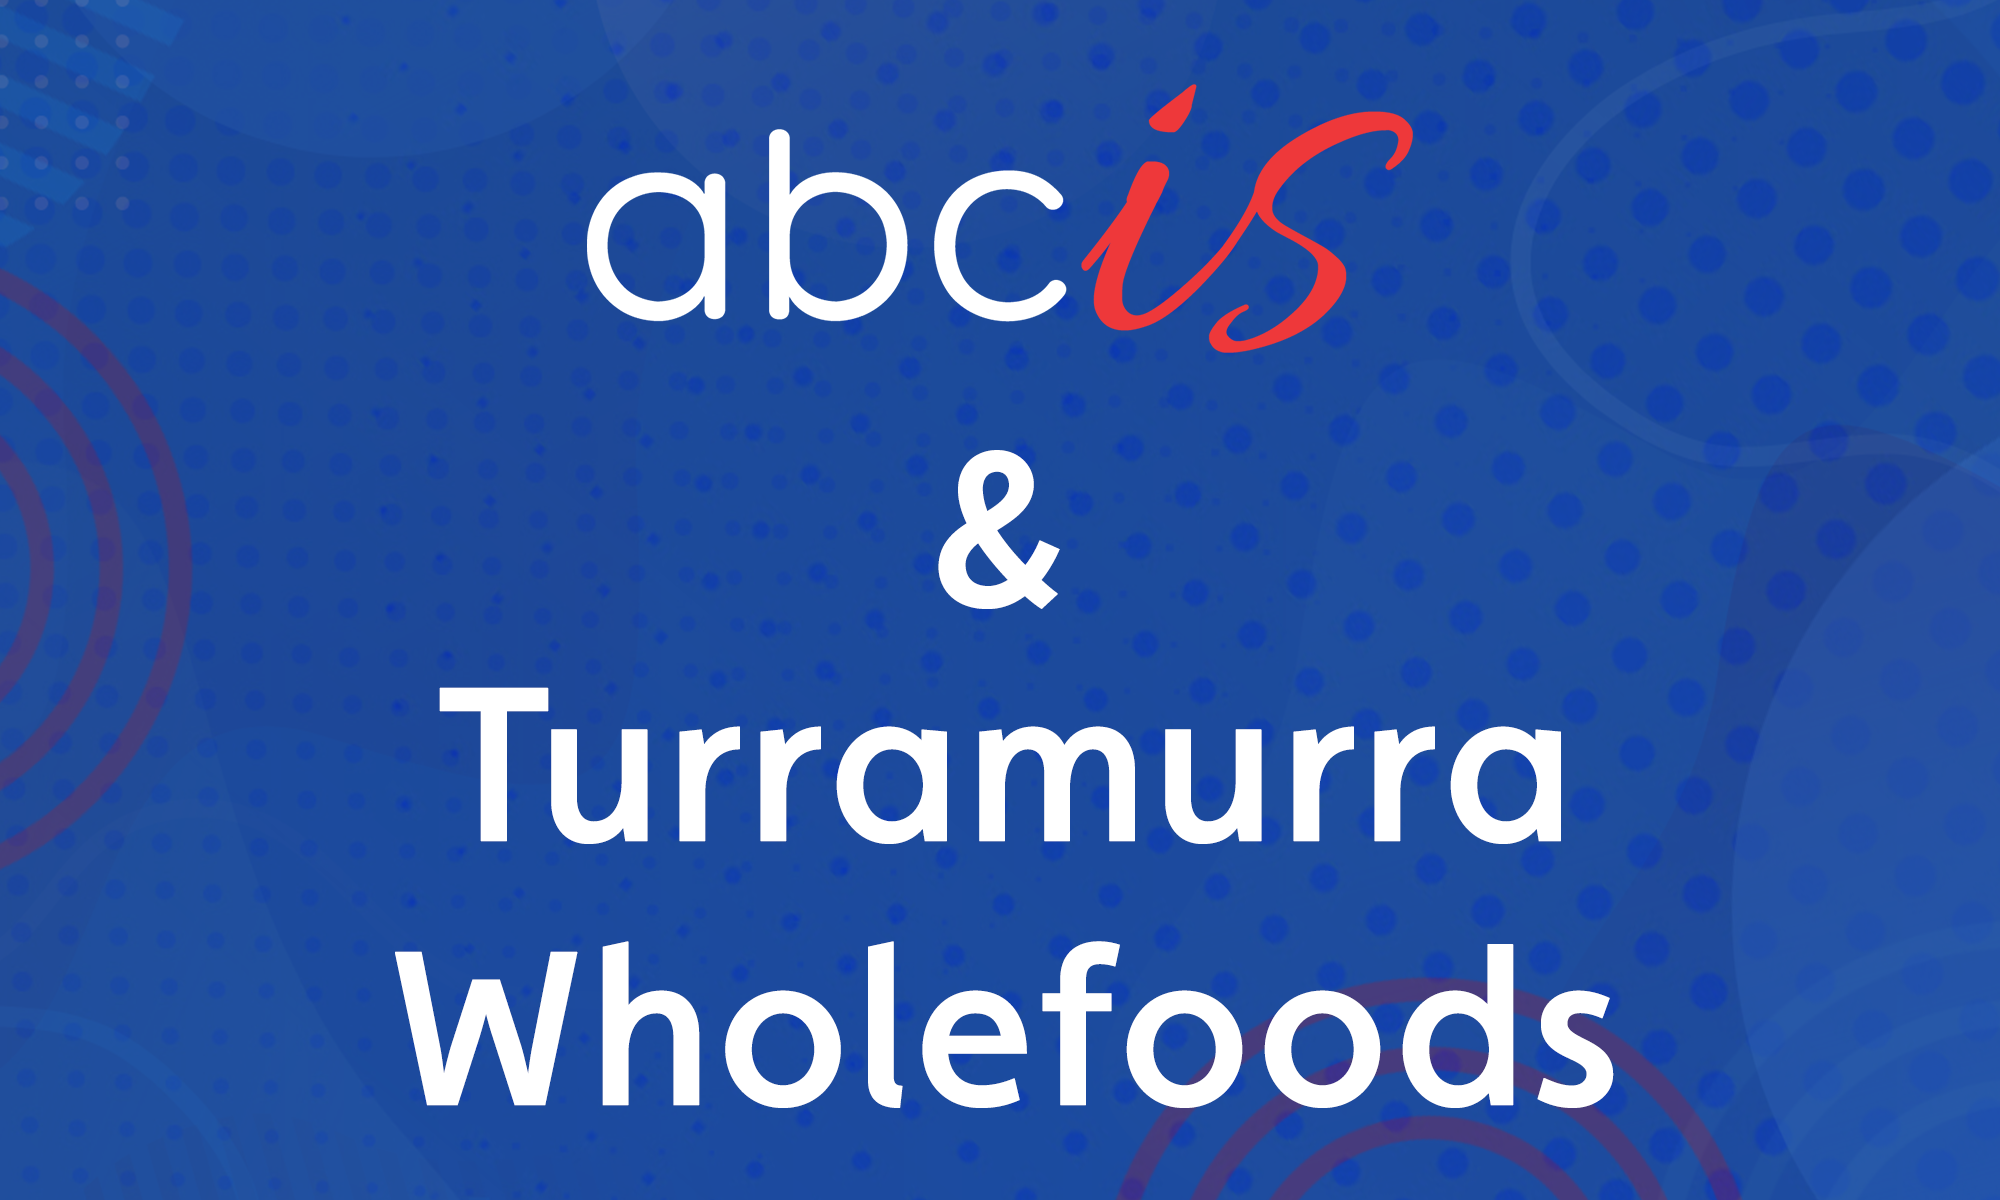 Featured image for “Turramurra Wholefoods”